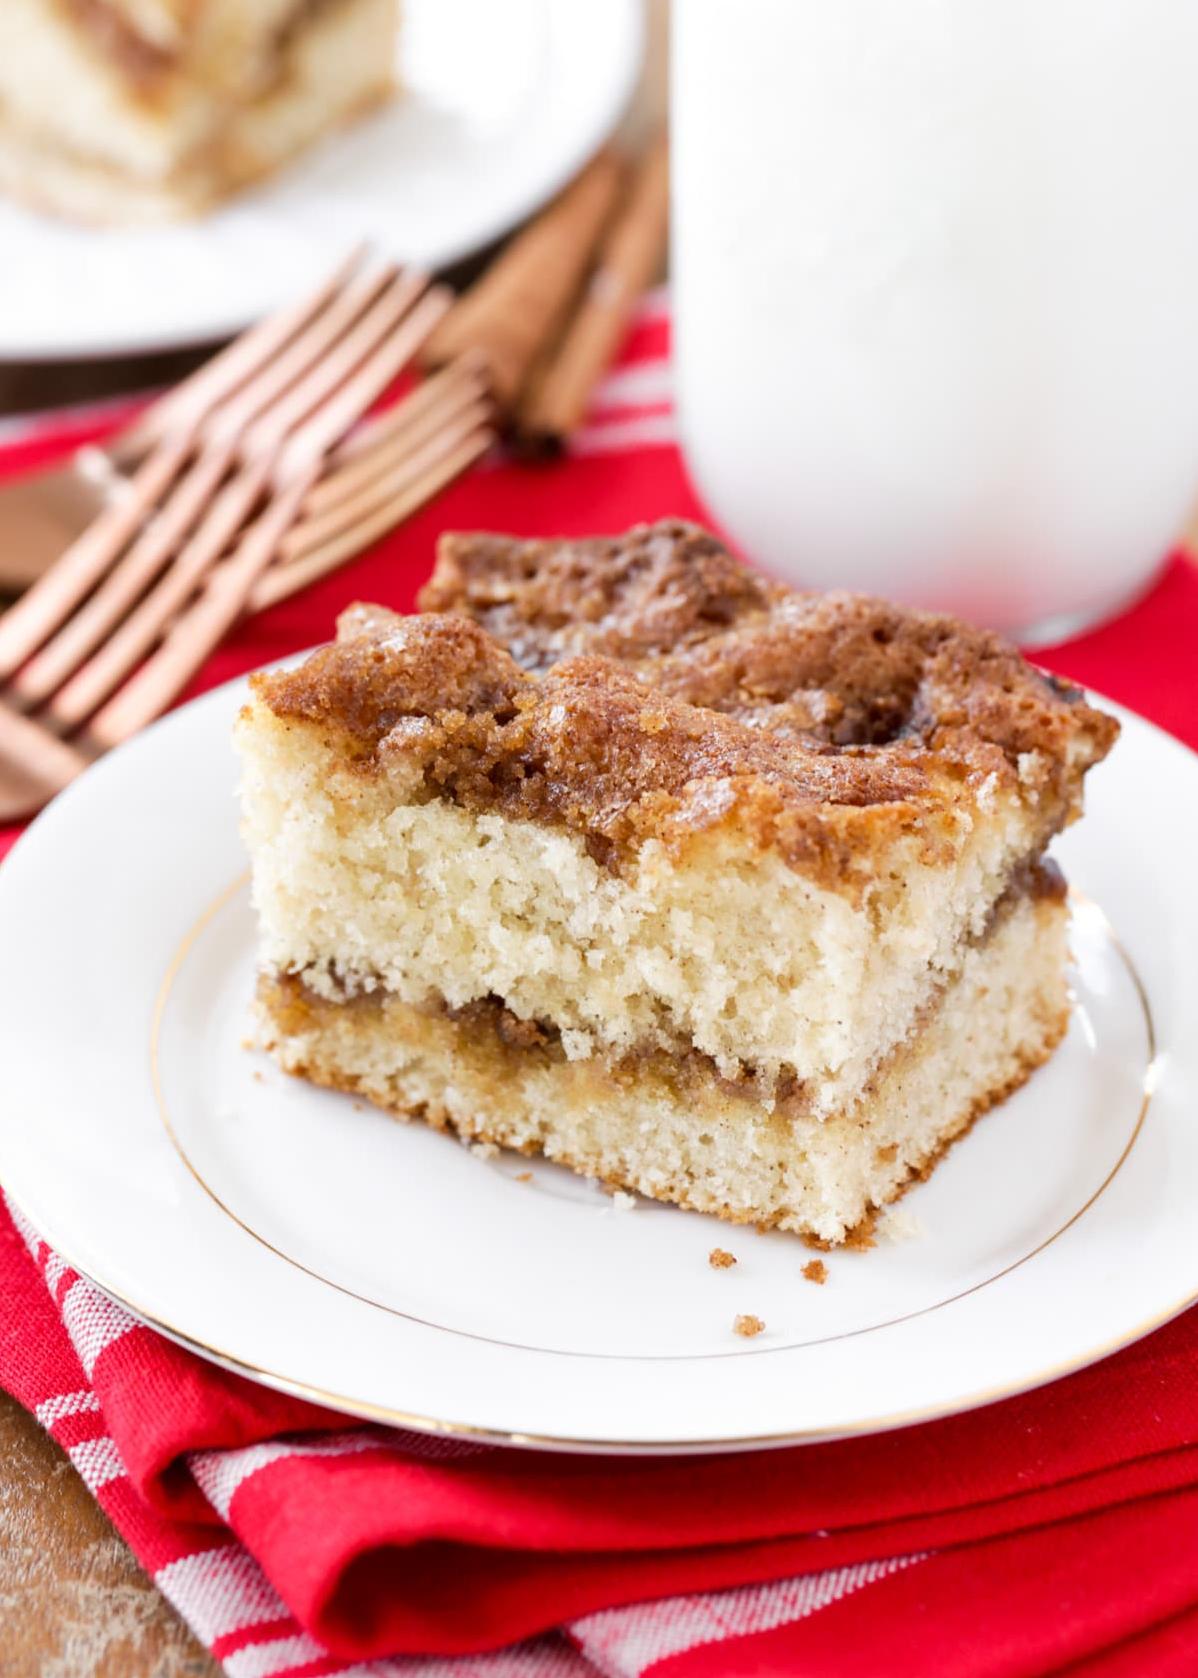  Every forkful of this coffee cake is a bite of paradise.